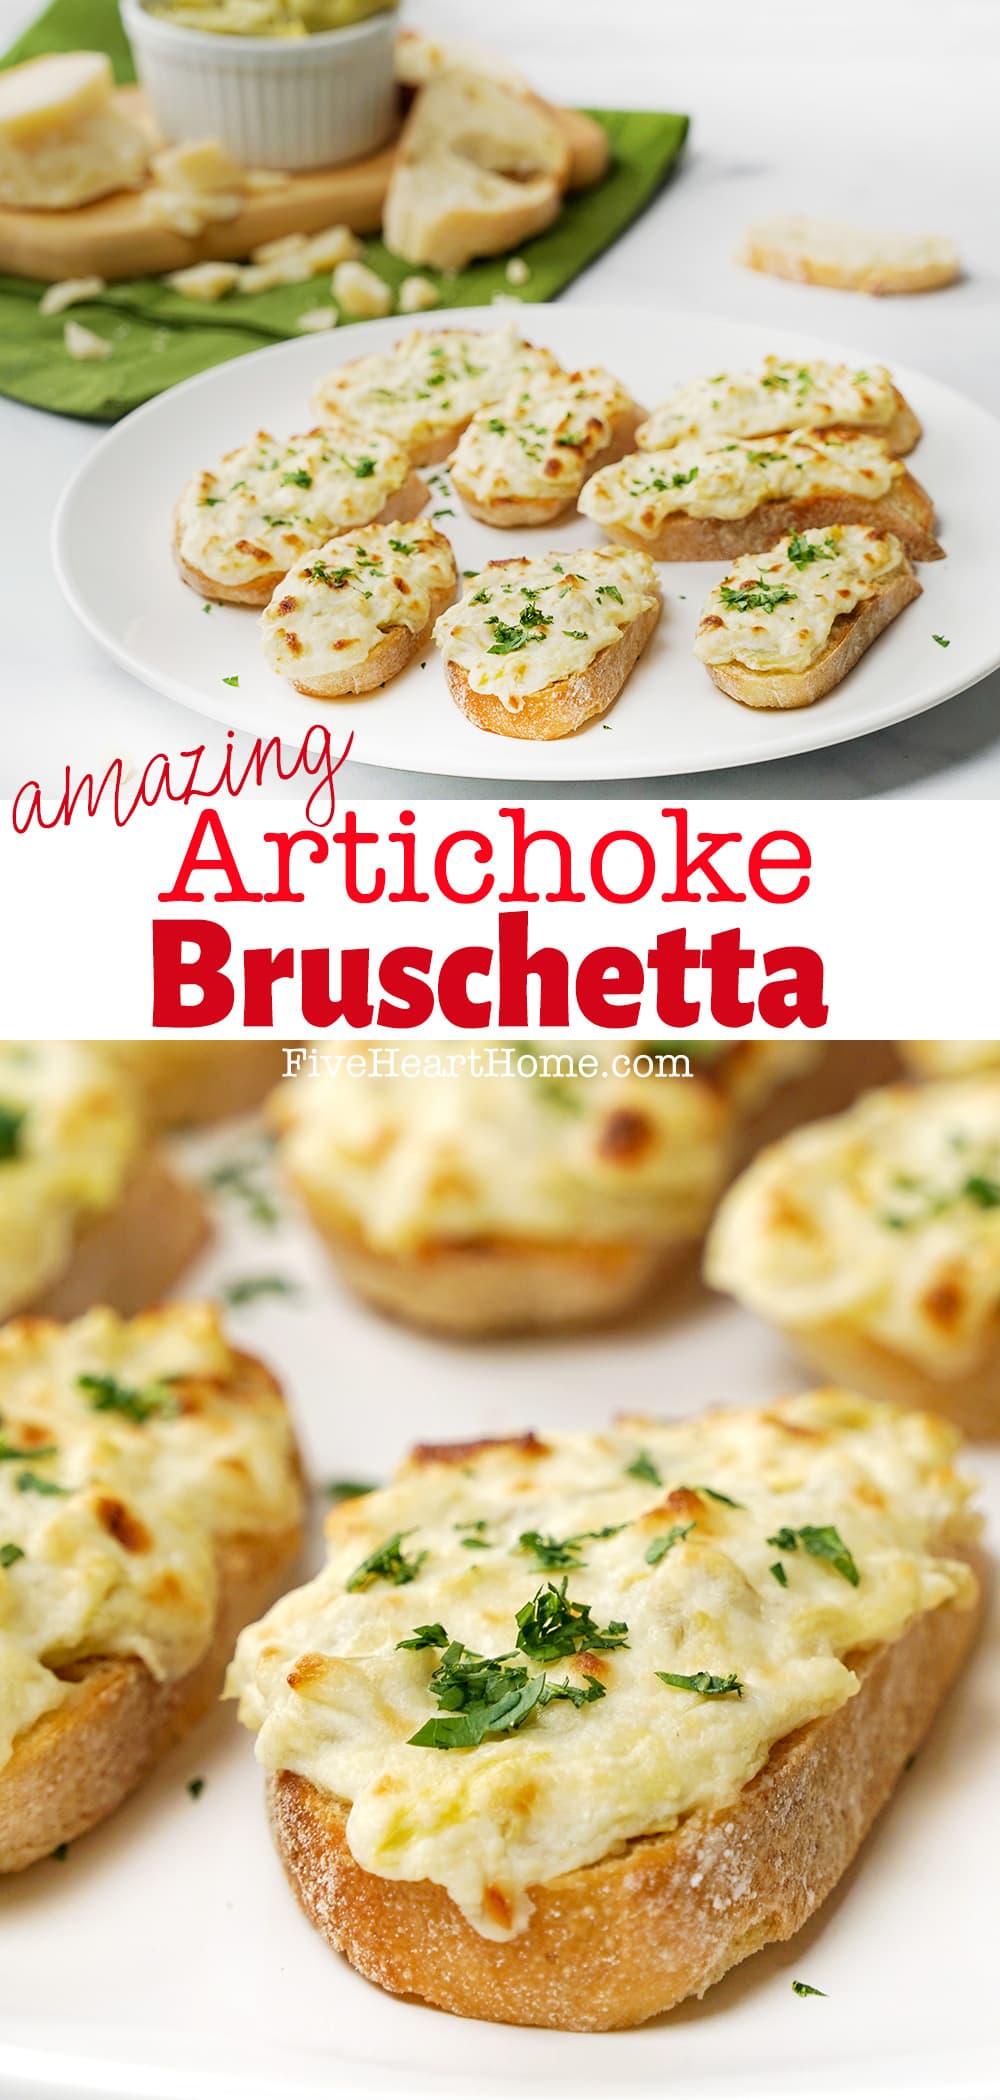 Artichoke Bruschetta ~ toasty baguette slices topped with a creamy artichoke spread and then broiled until bubbly for an easy appetizer that's fancy enough for a party! | FiveHeartHome.com via @fivehearthome